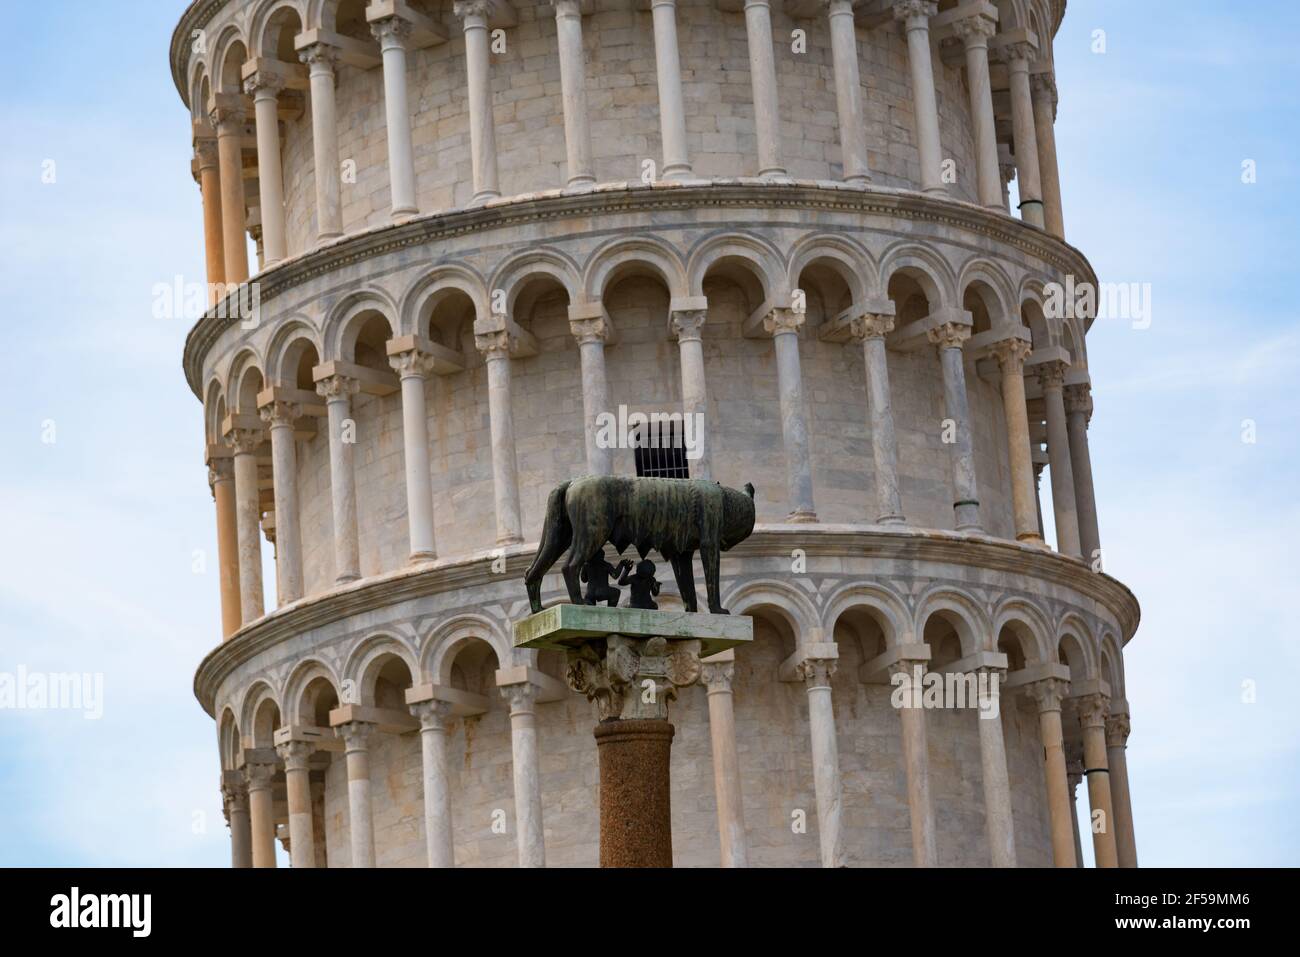 The leaning tower of Pisa, The square of Miracles Piazza dei Miracoli in Pisa, Tuscany, Italy Stock Photo